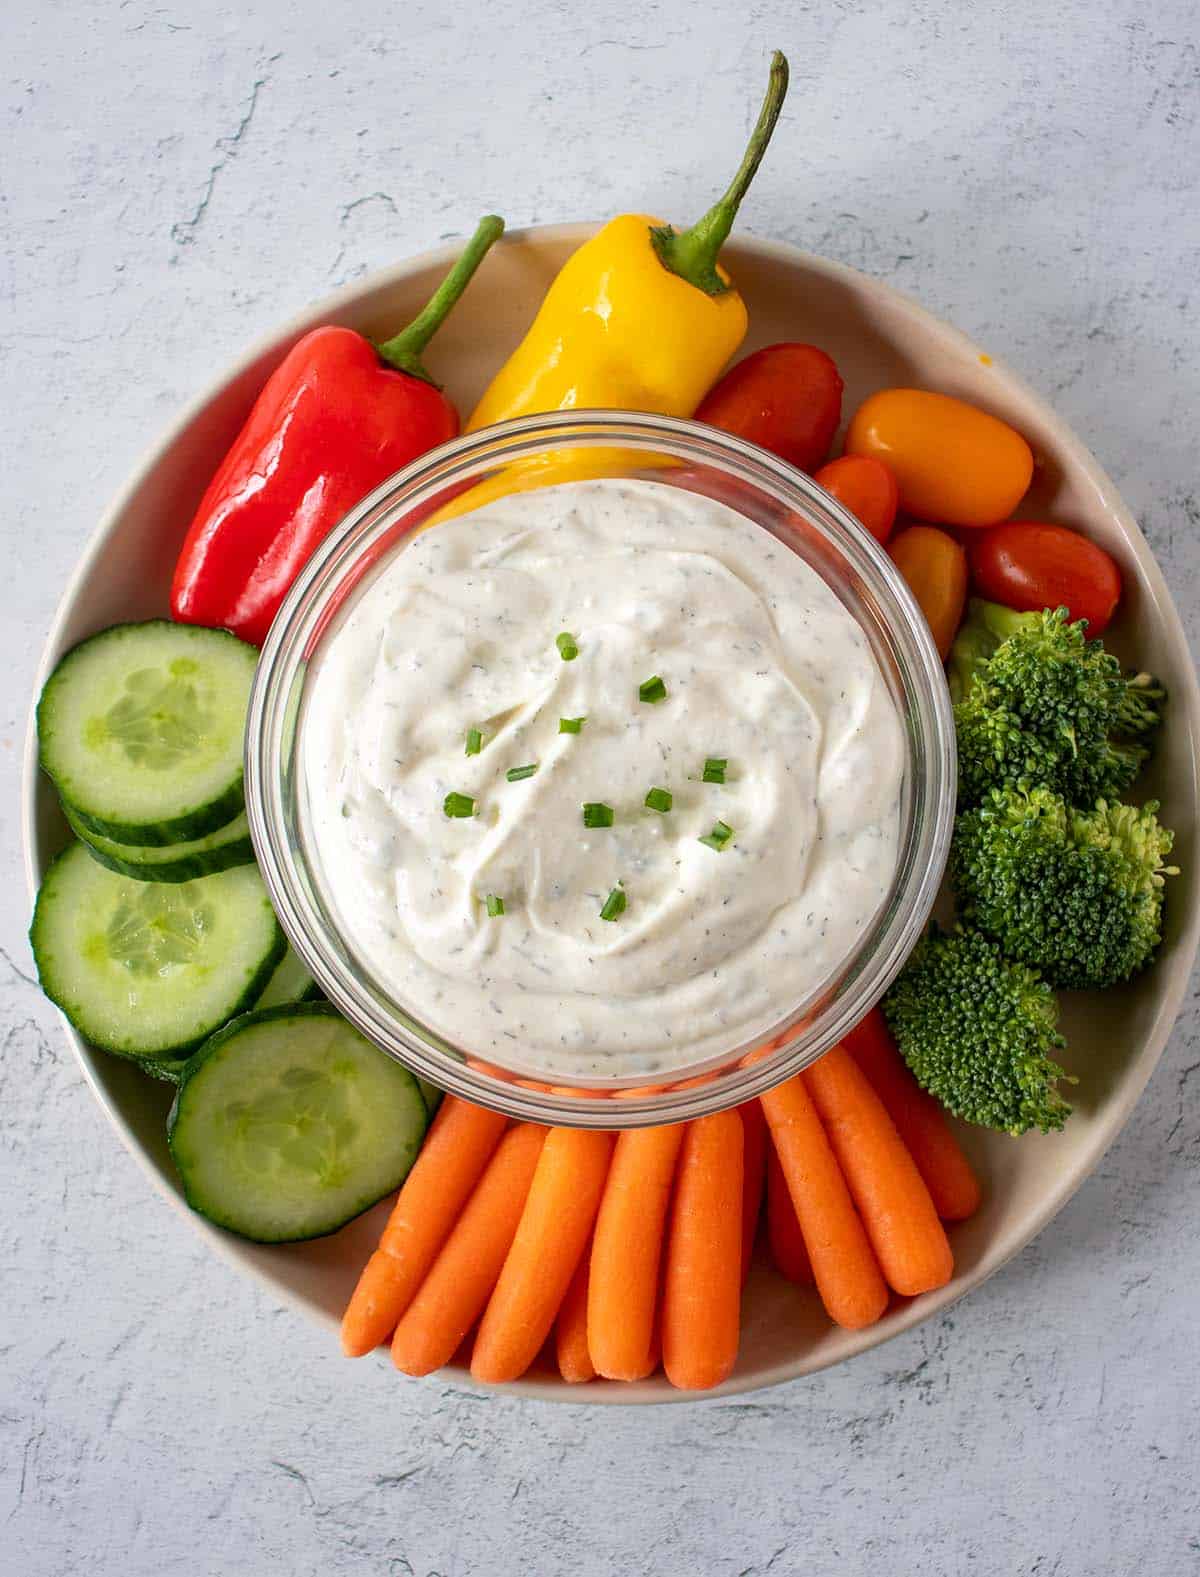 Homemade ranch dip in clear glass bowl topped with fresh chives surrounded by a plate of fresh cut veggies. Carrots, broccoli, cucumber, tomatoes and peppers.